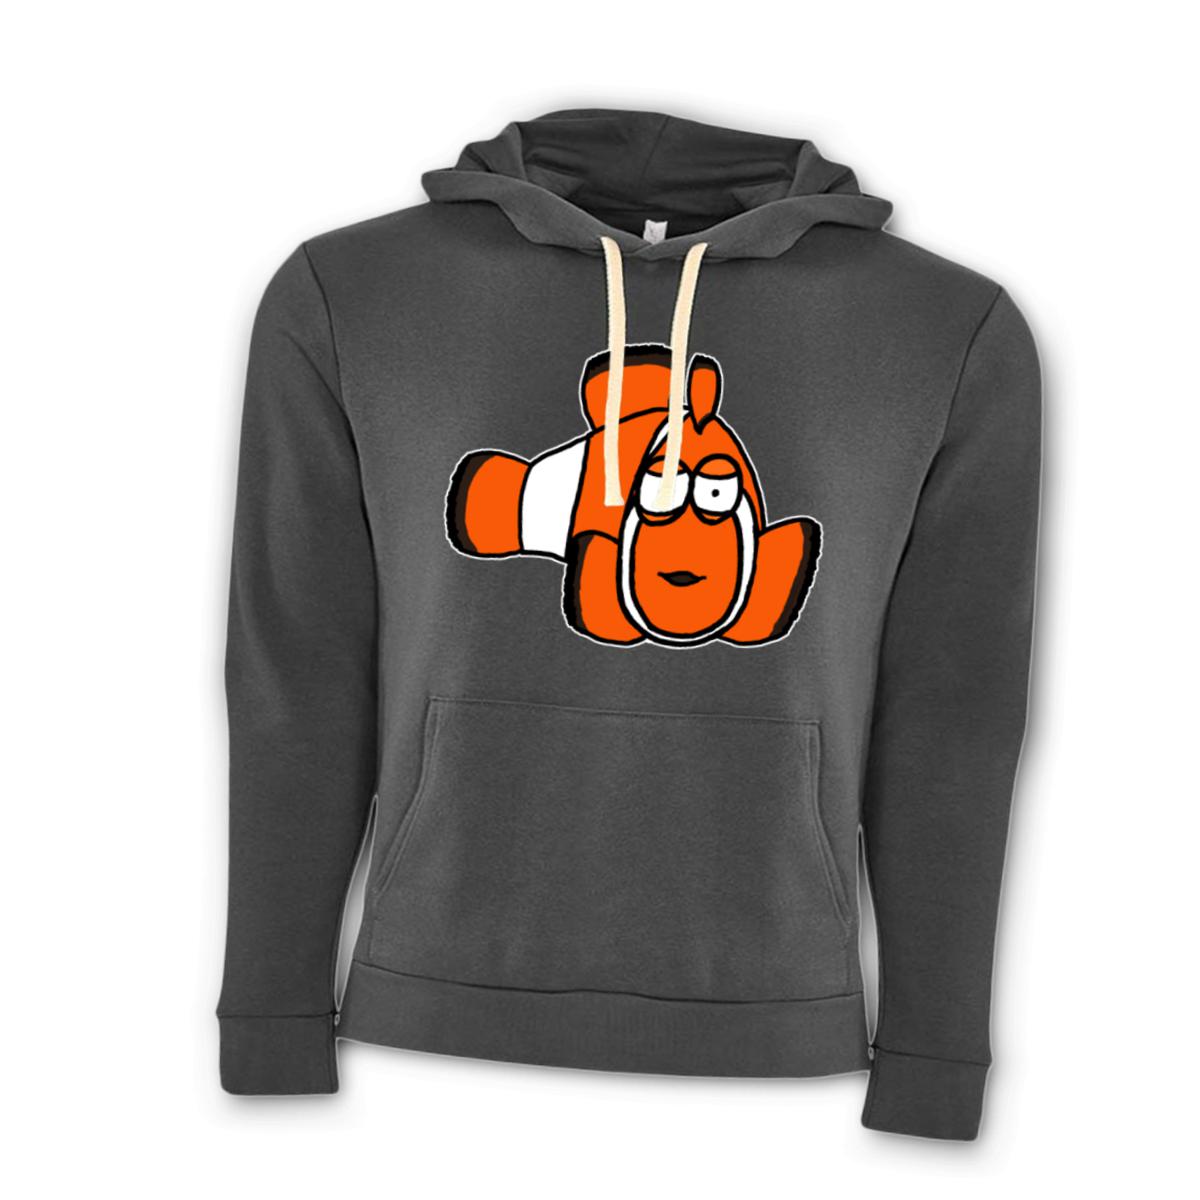 Clown Fish Unisex Pullover Hoodie Small heavy-metal